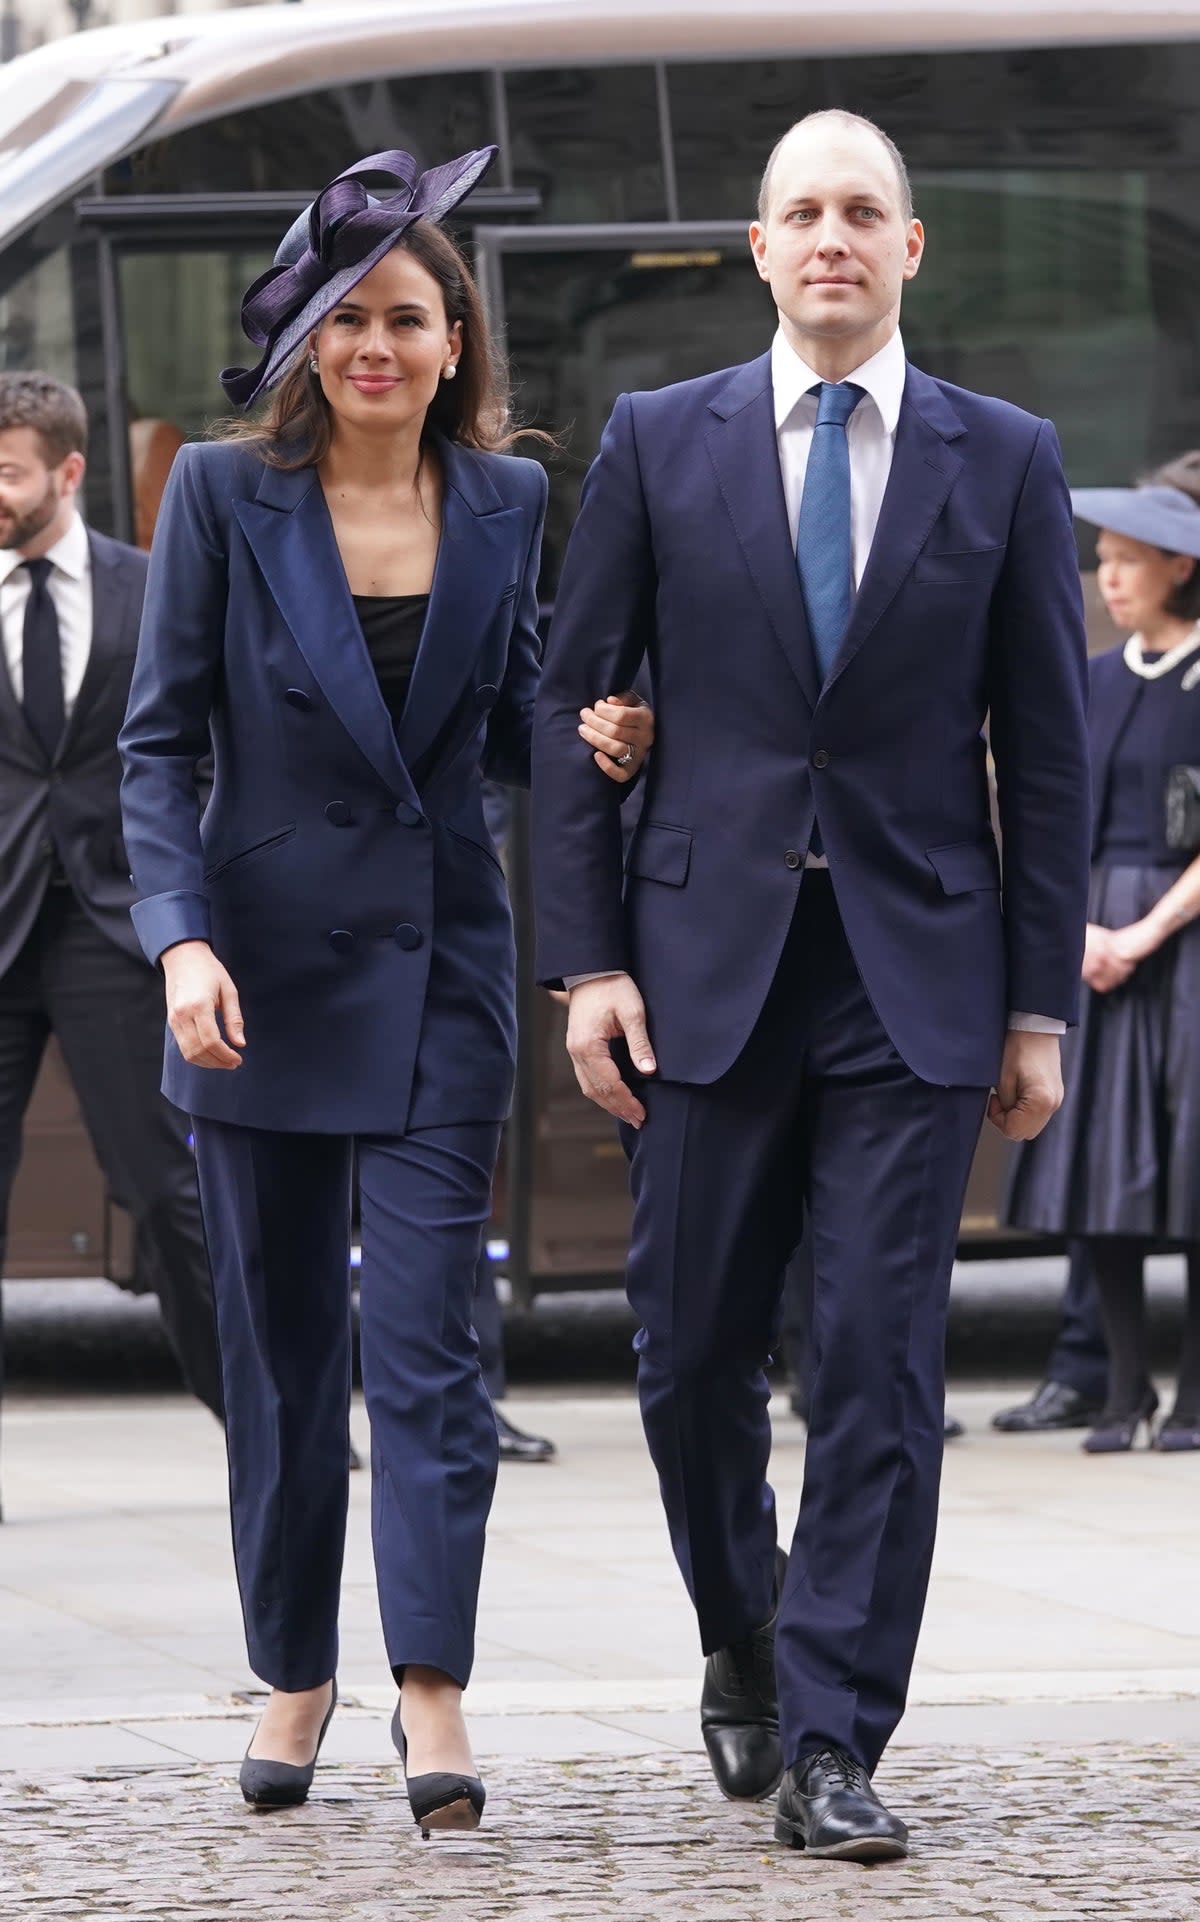 Lady Frederick Windsor and Lord Frederick Windsor arriving for a Service of Thanksgiving for the life of the Duke of Edinburgh, at Westminster Abbey in London (Kirsty O’Connor/PA) (PA Wire)